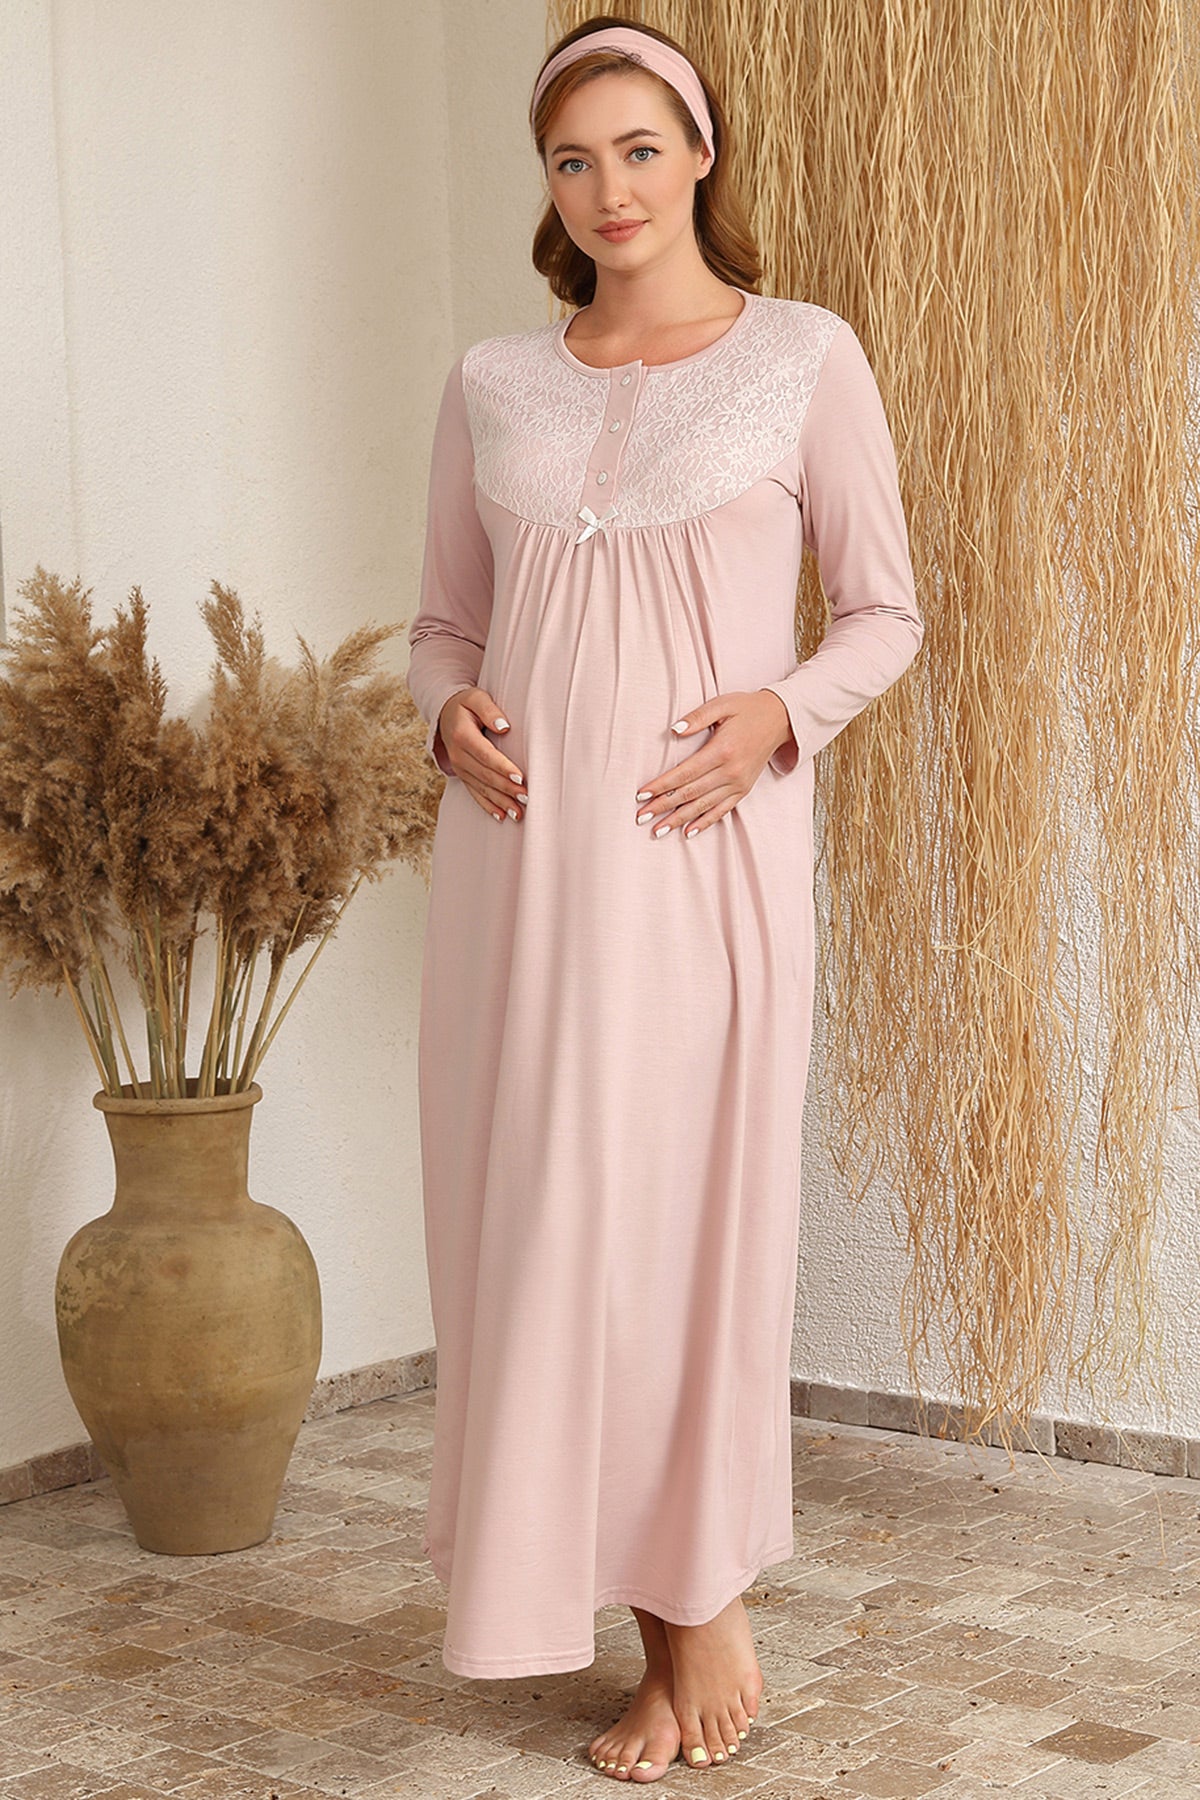 Lace Collar Maternity & Nursing Nightgown With Robe Powder - 4416